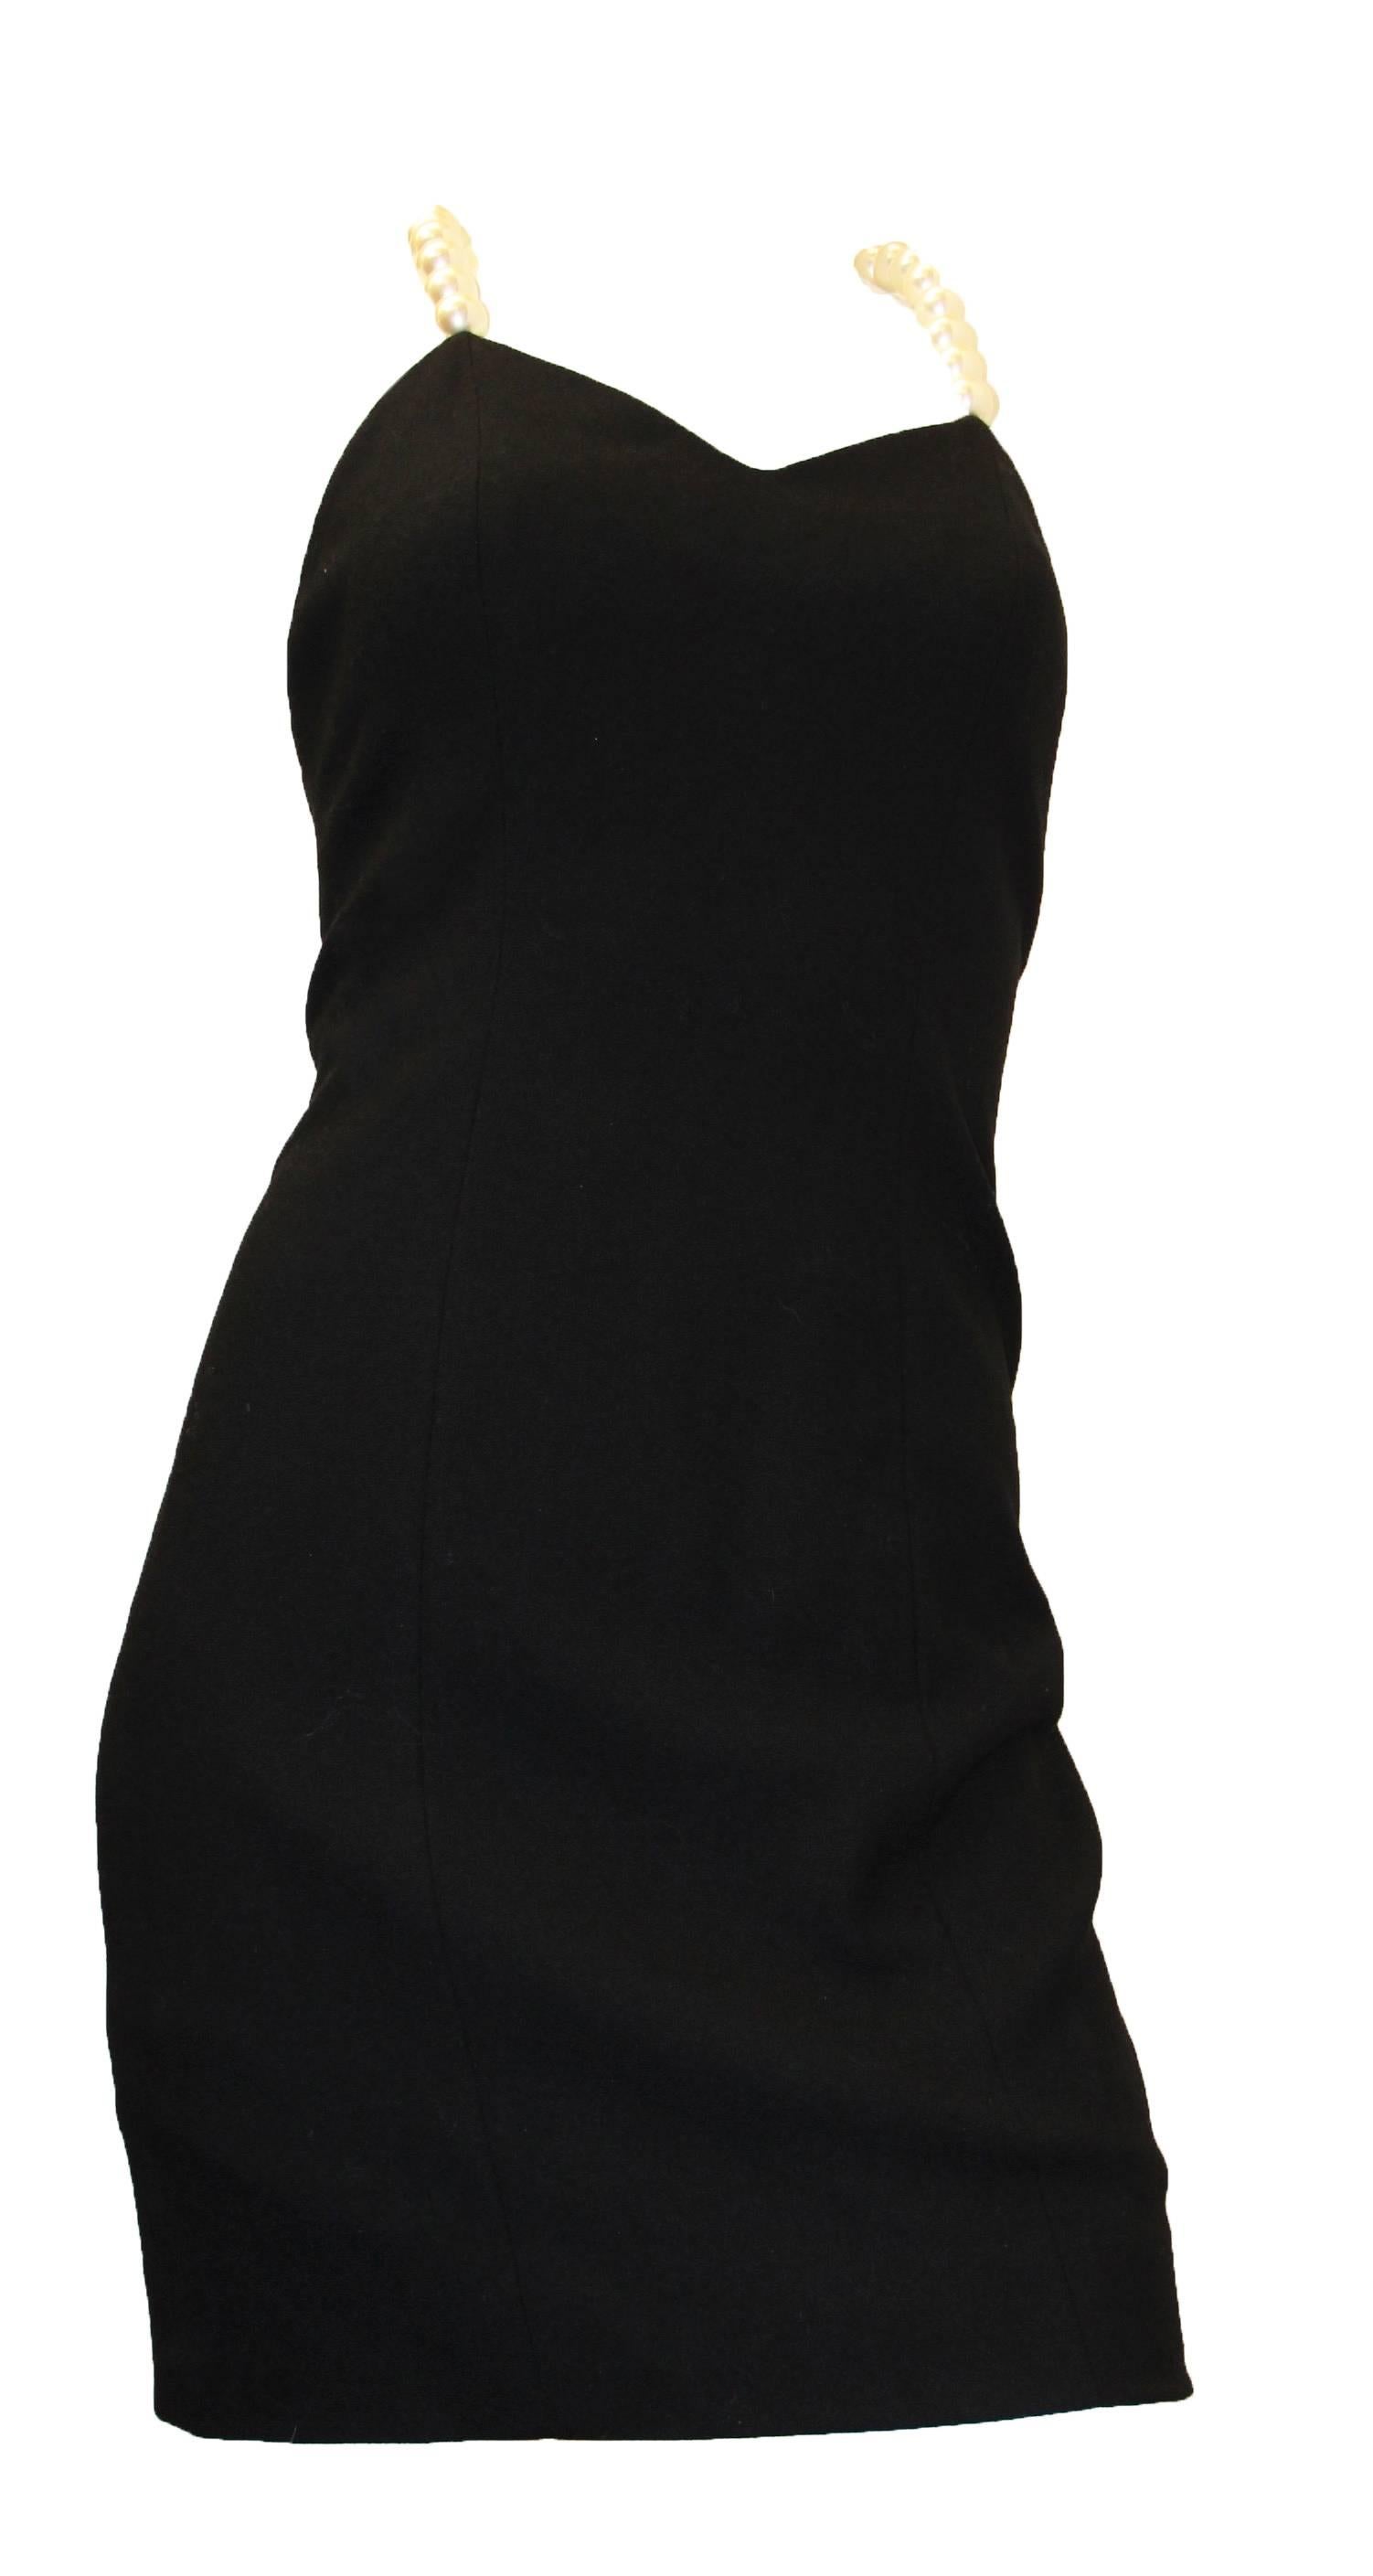 black dress with pearl straps